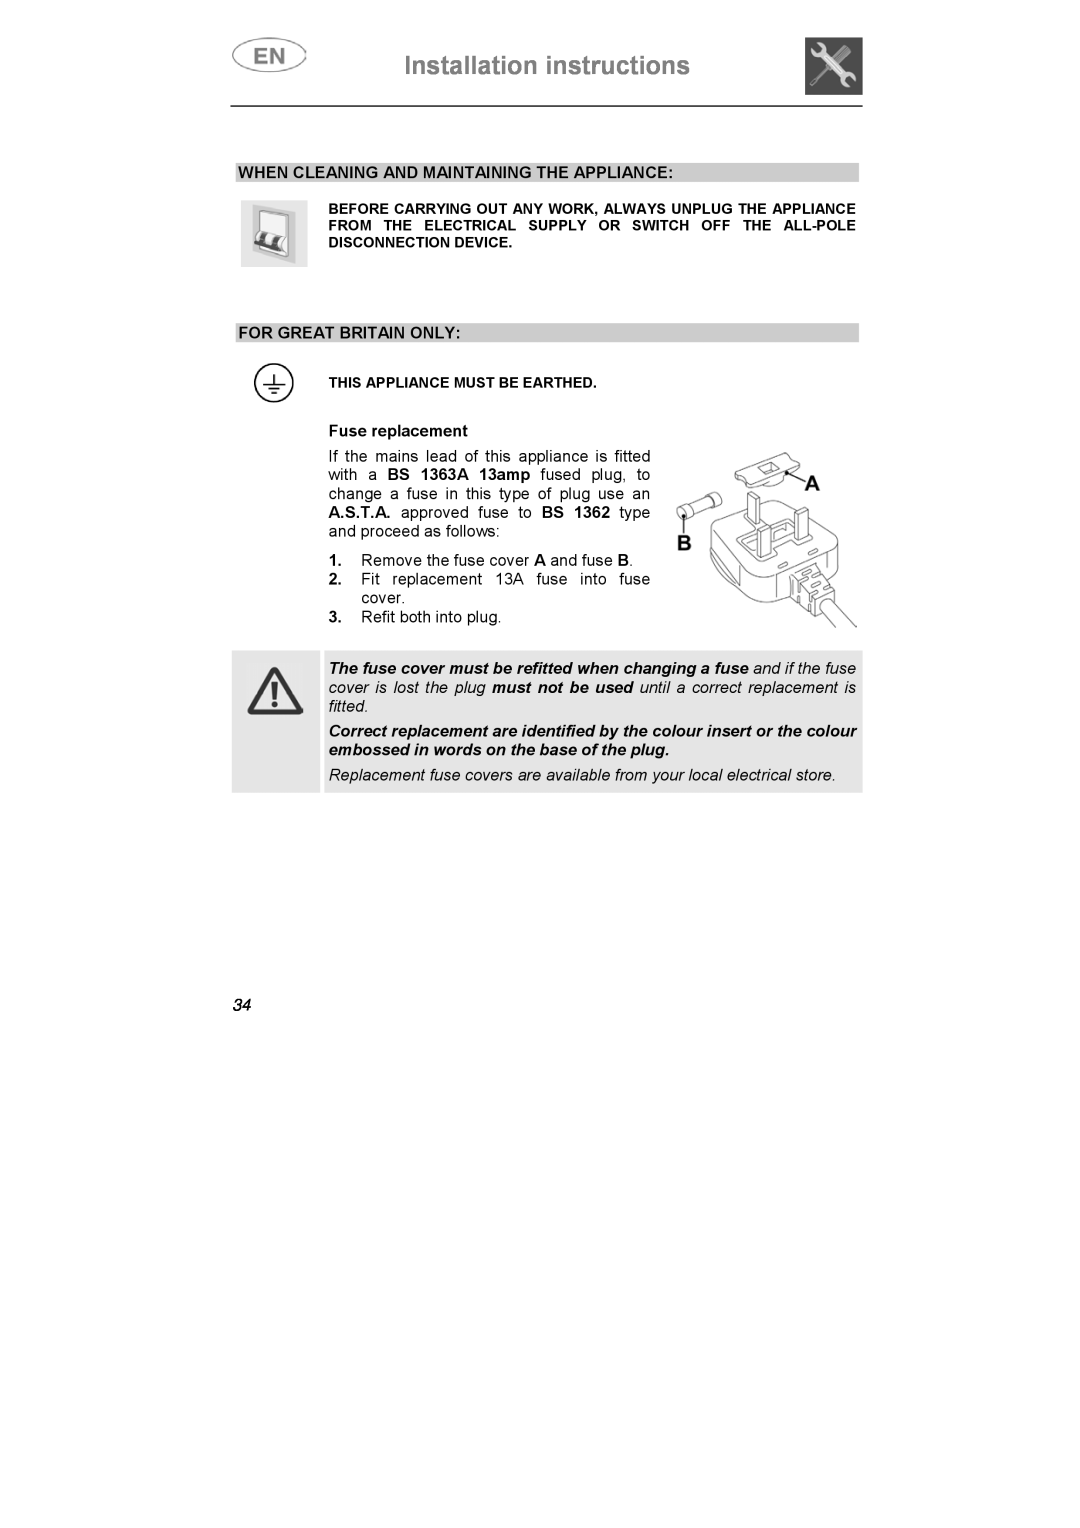 Smeg DI612CAH manual Installation instructions, When Cleaning And Maintaining The Appliance, For Great Britain Only 